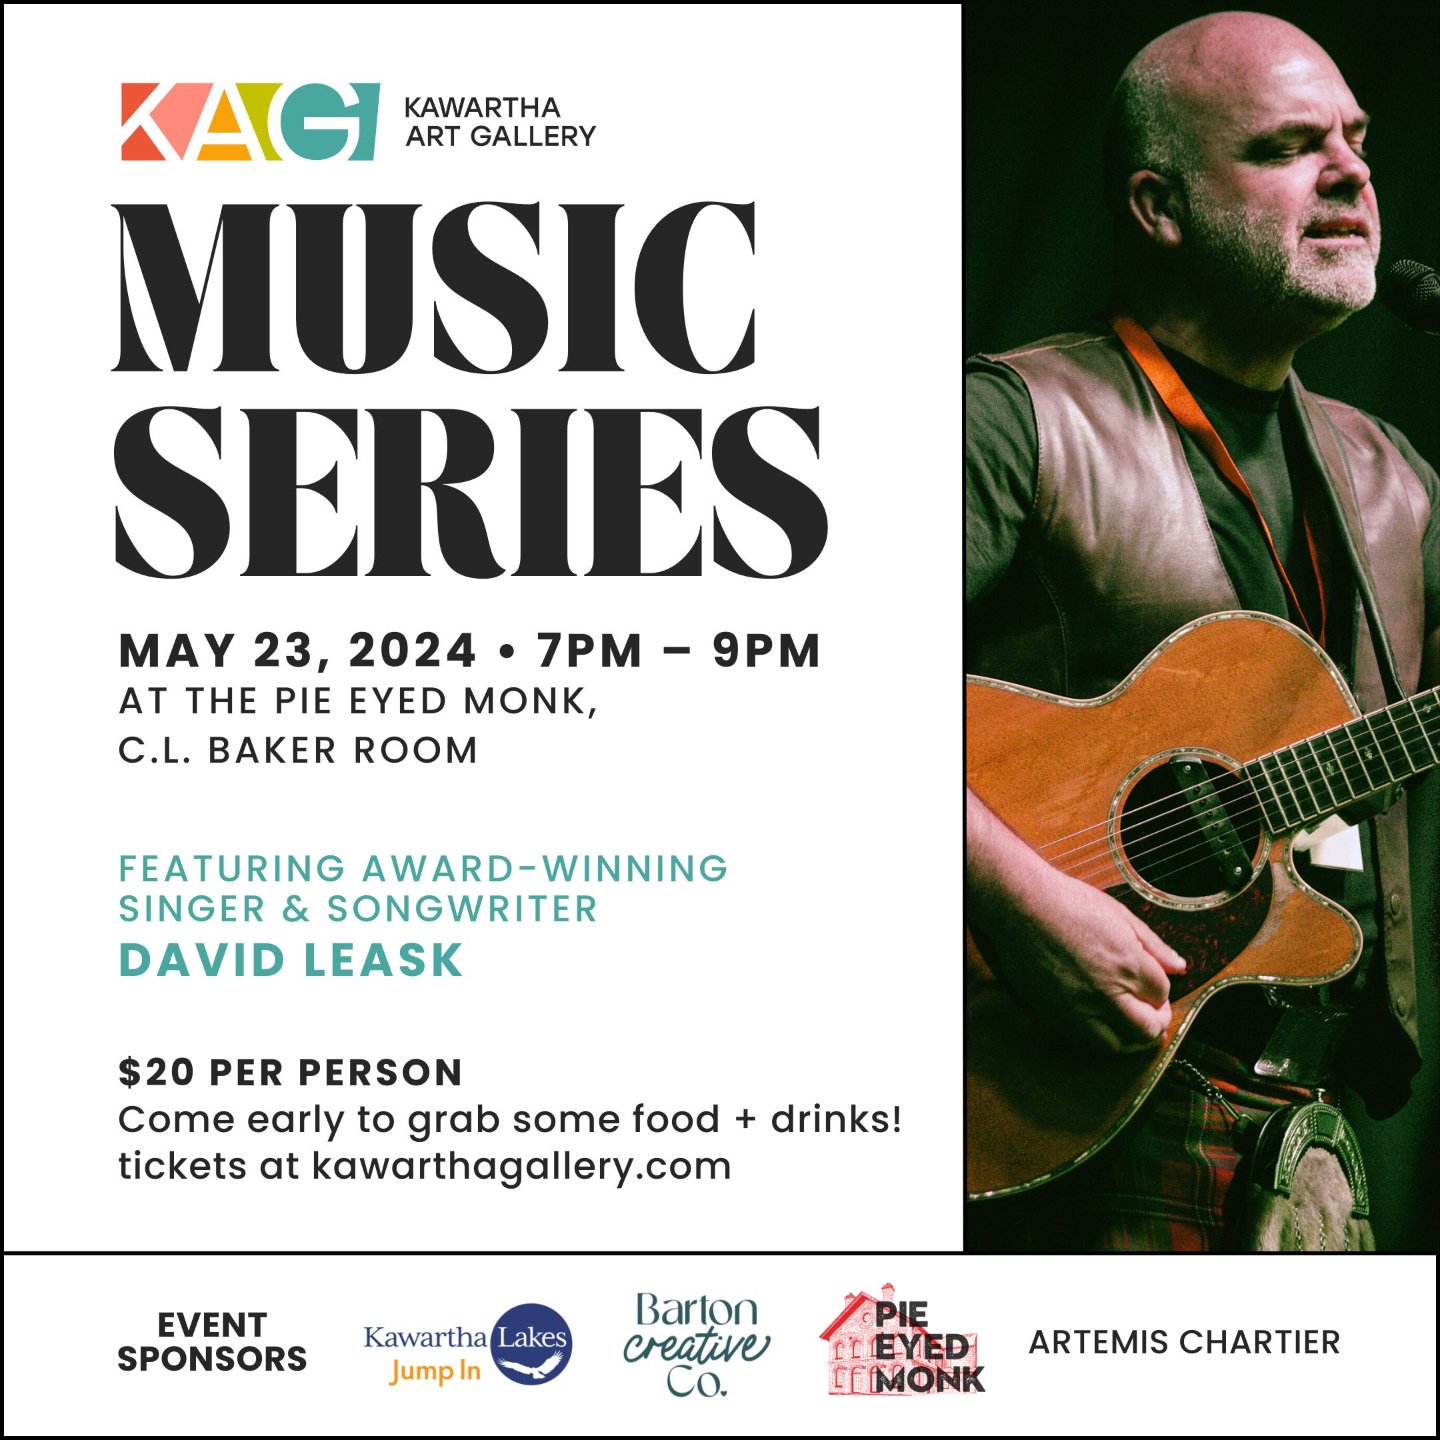 Join us for our second Kawartha Art Gallery Music Series on May 23 🎶

Join us inside the C. L. Baker Room at the Pie Eyed Monk for the Kawartha Art Gallery Music Series for an unforgettable evening with award-winning songwriter and captivating perfo